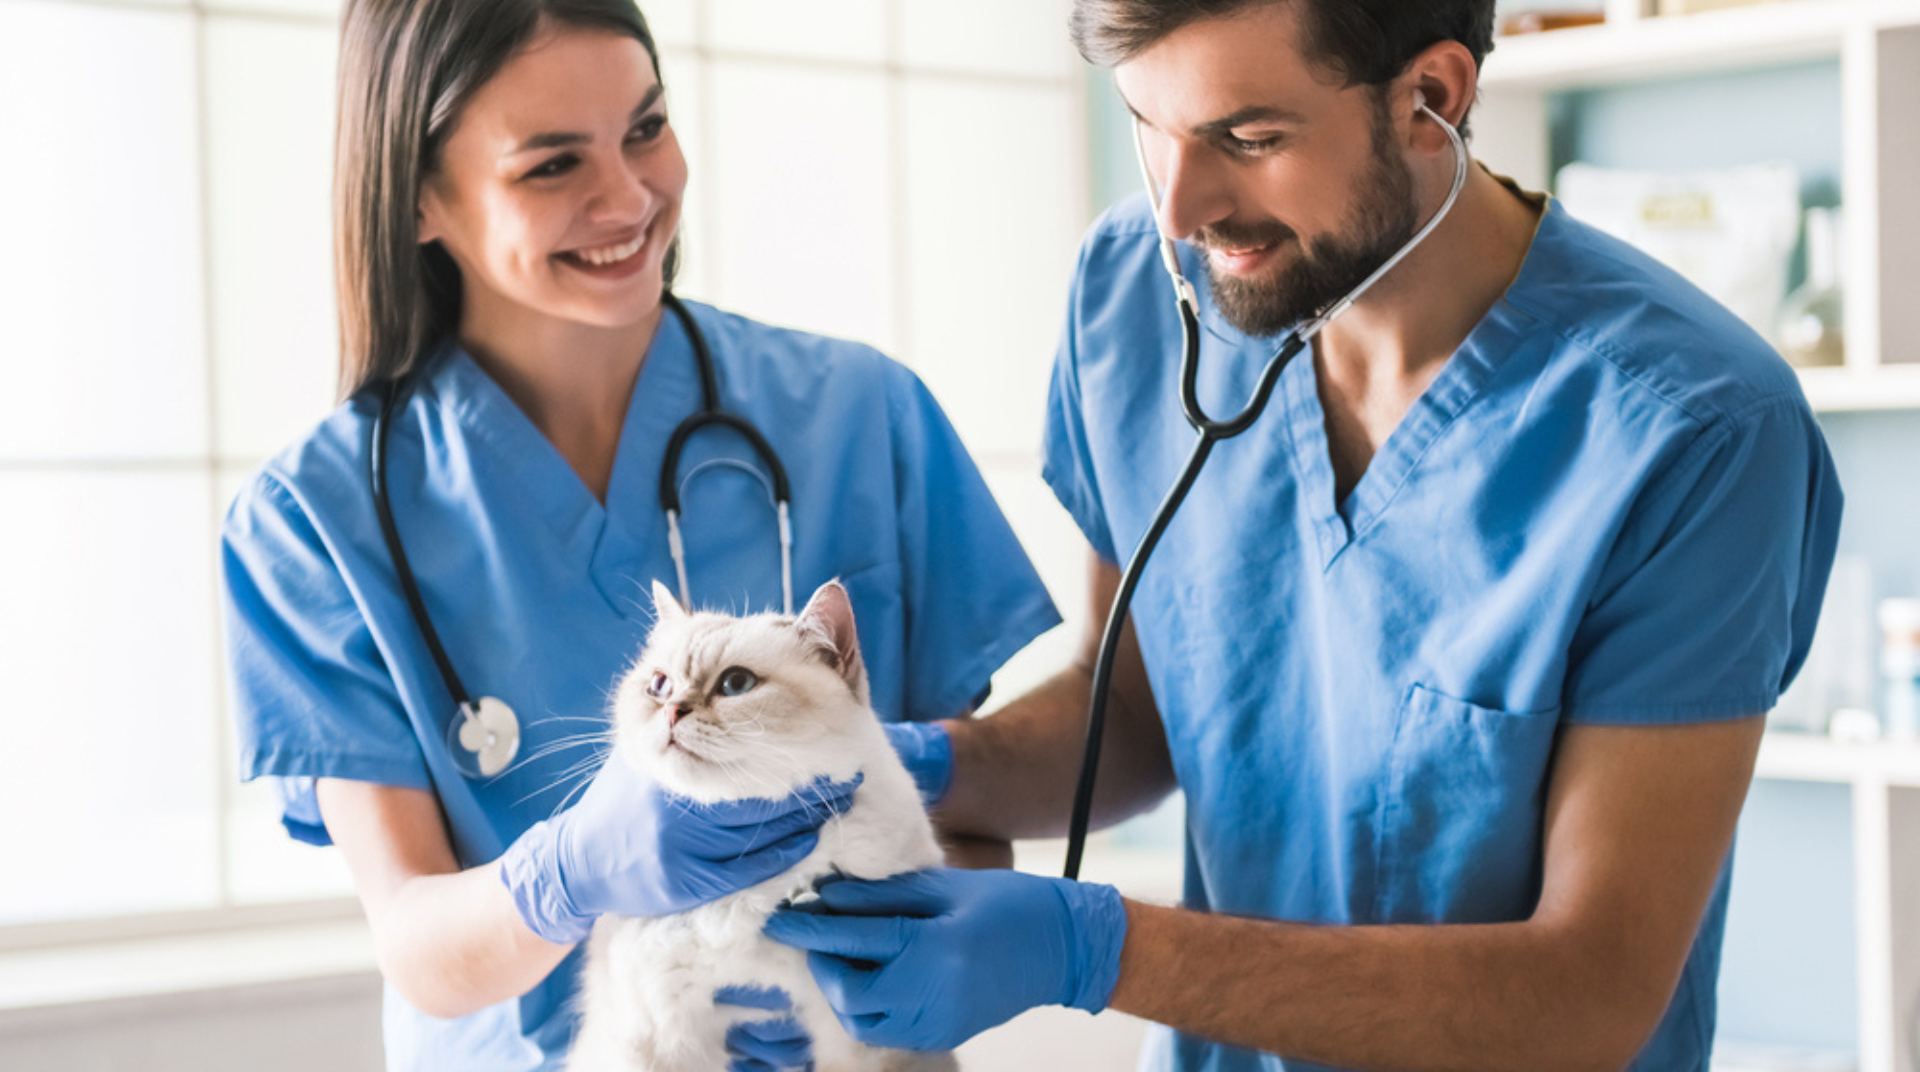 How to Build a Veterinary Marketing Strategy for Your Vet Practice [The Complete Guide]